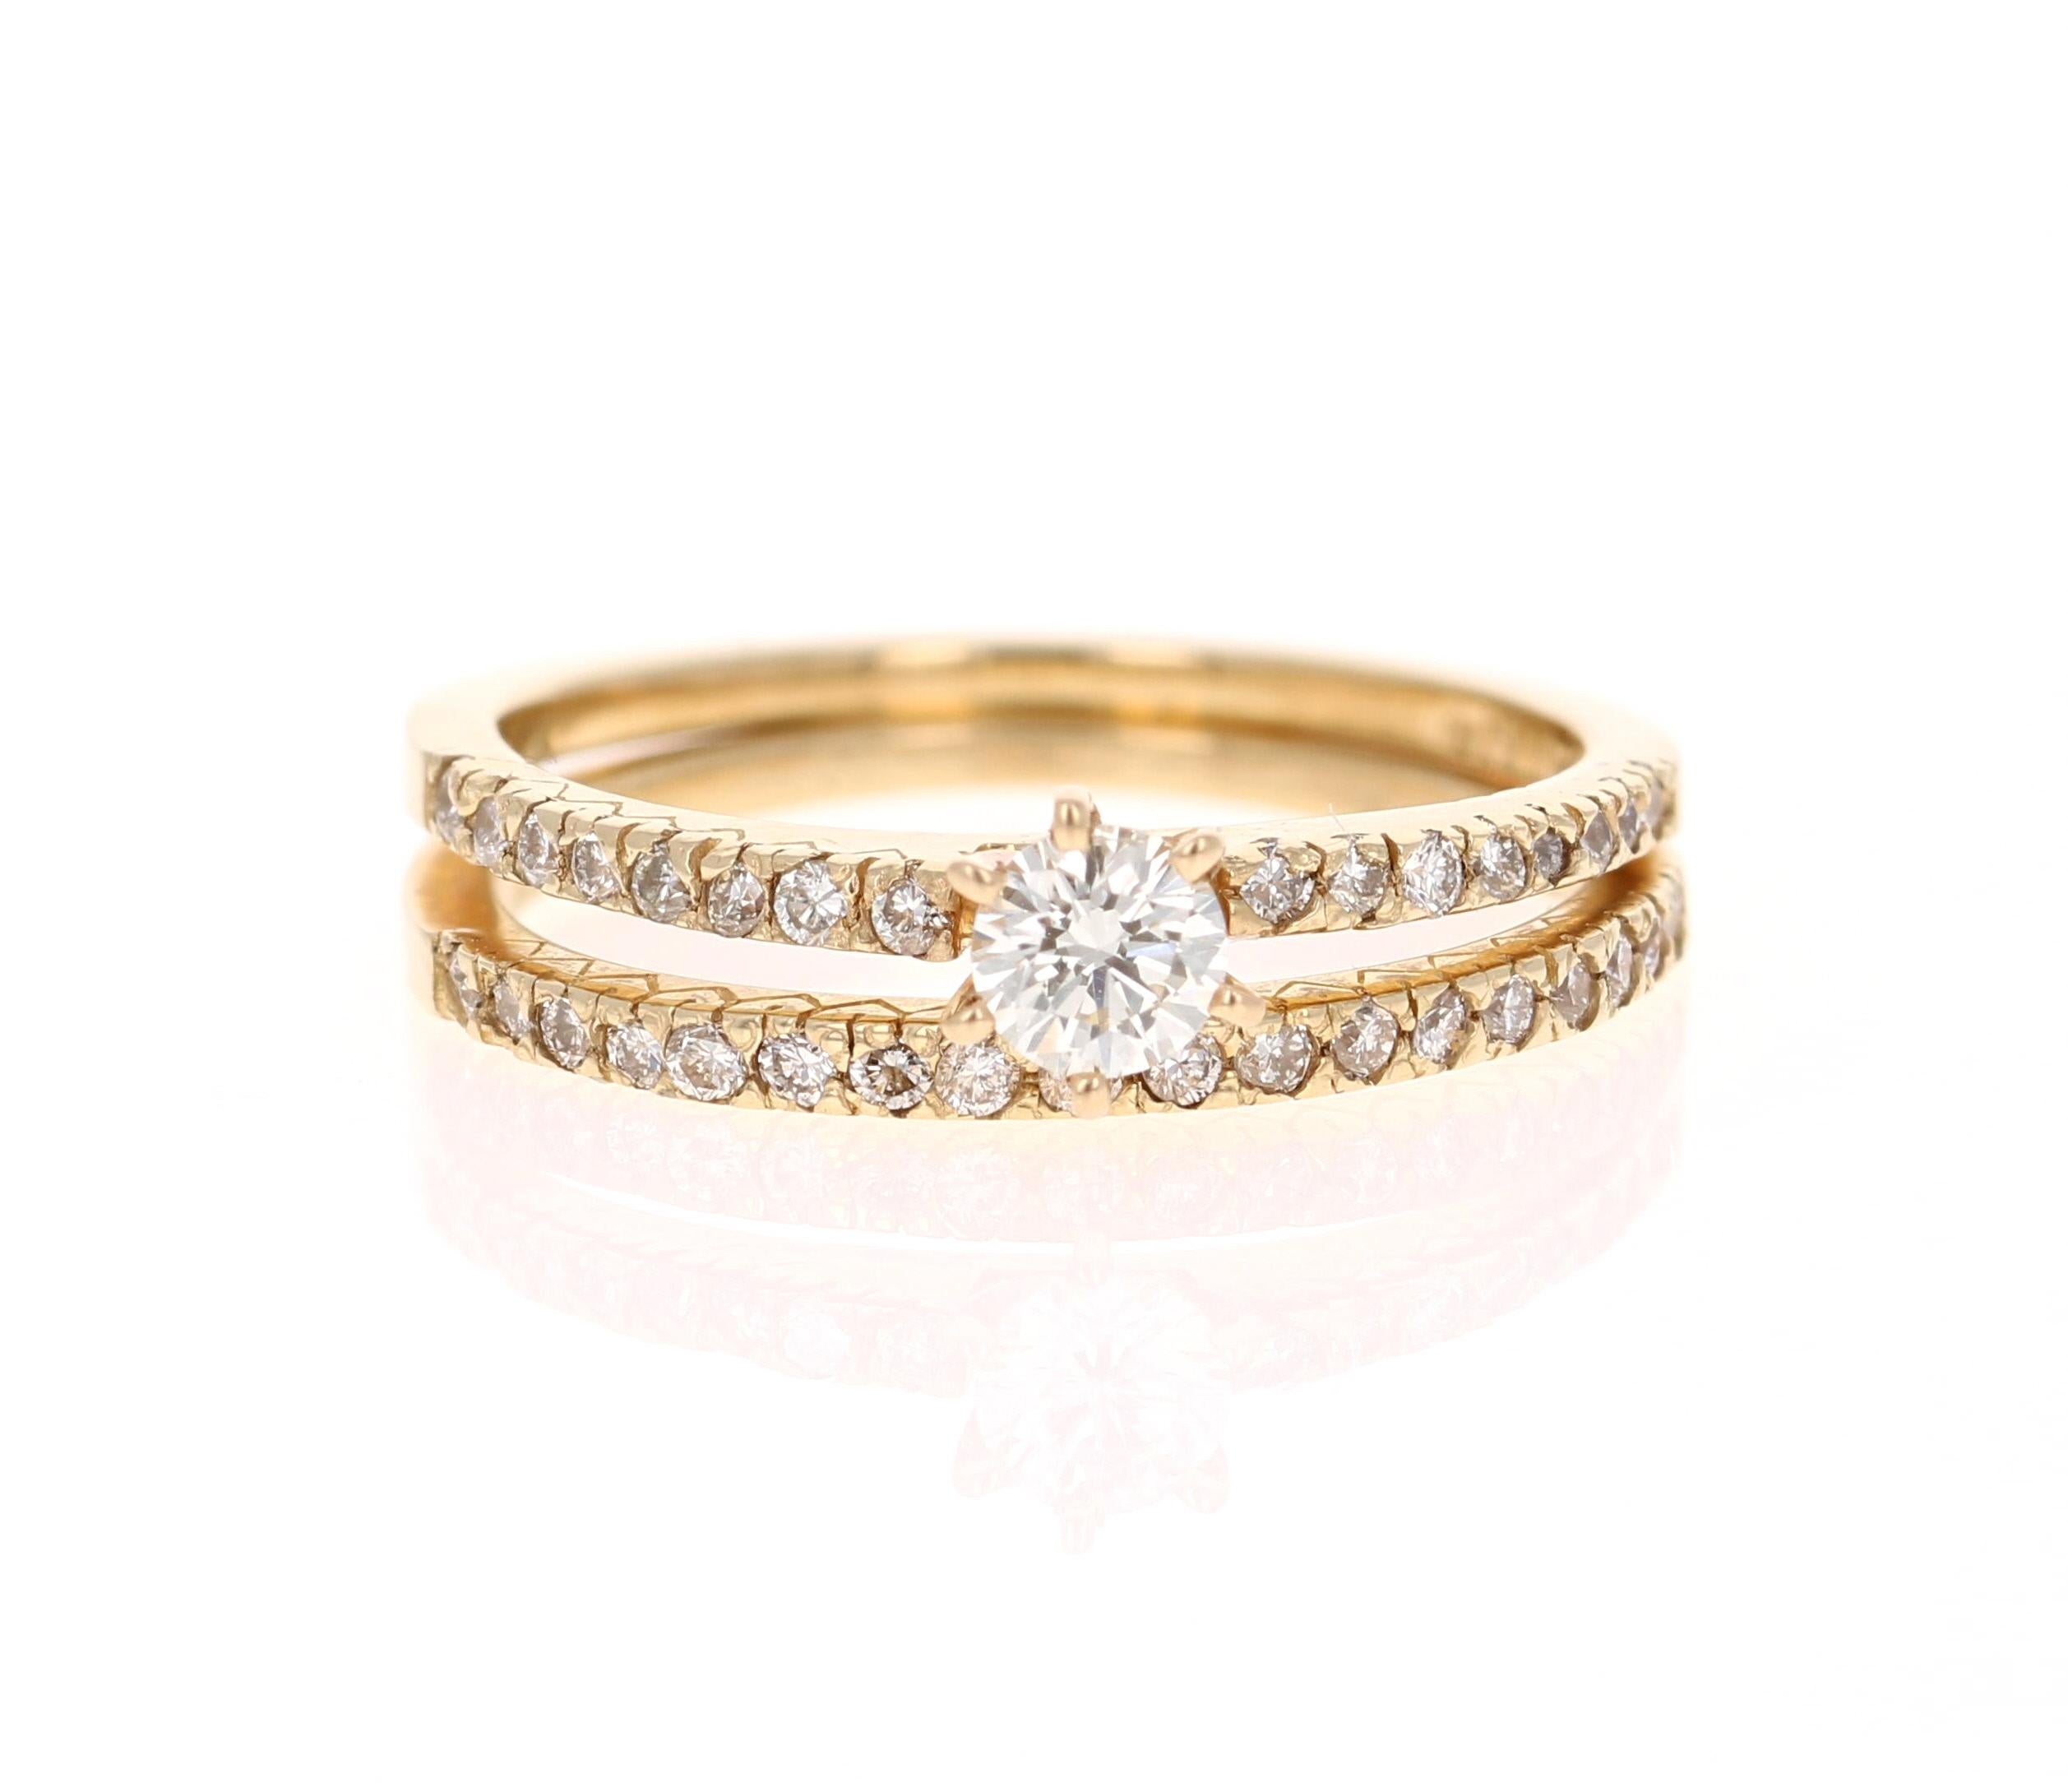 Beautiful Wedding Set in 14 Karat Yellow Gold

The center round cut diamond weighs 0.26 Carats (Clarity: SI1-, Color: H) and is surrounded by 34 round cut diamonds on the shank and on the band that weighs 0.36 Carats (Clarity: VS, Color: H) The